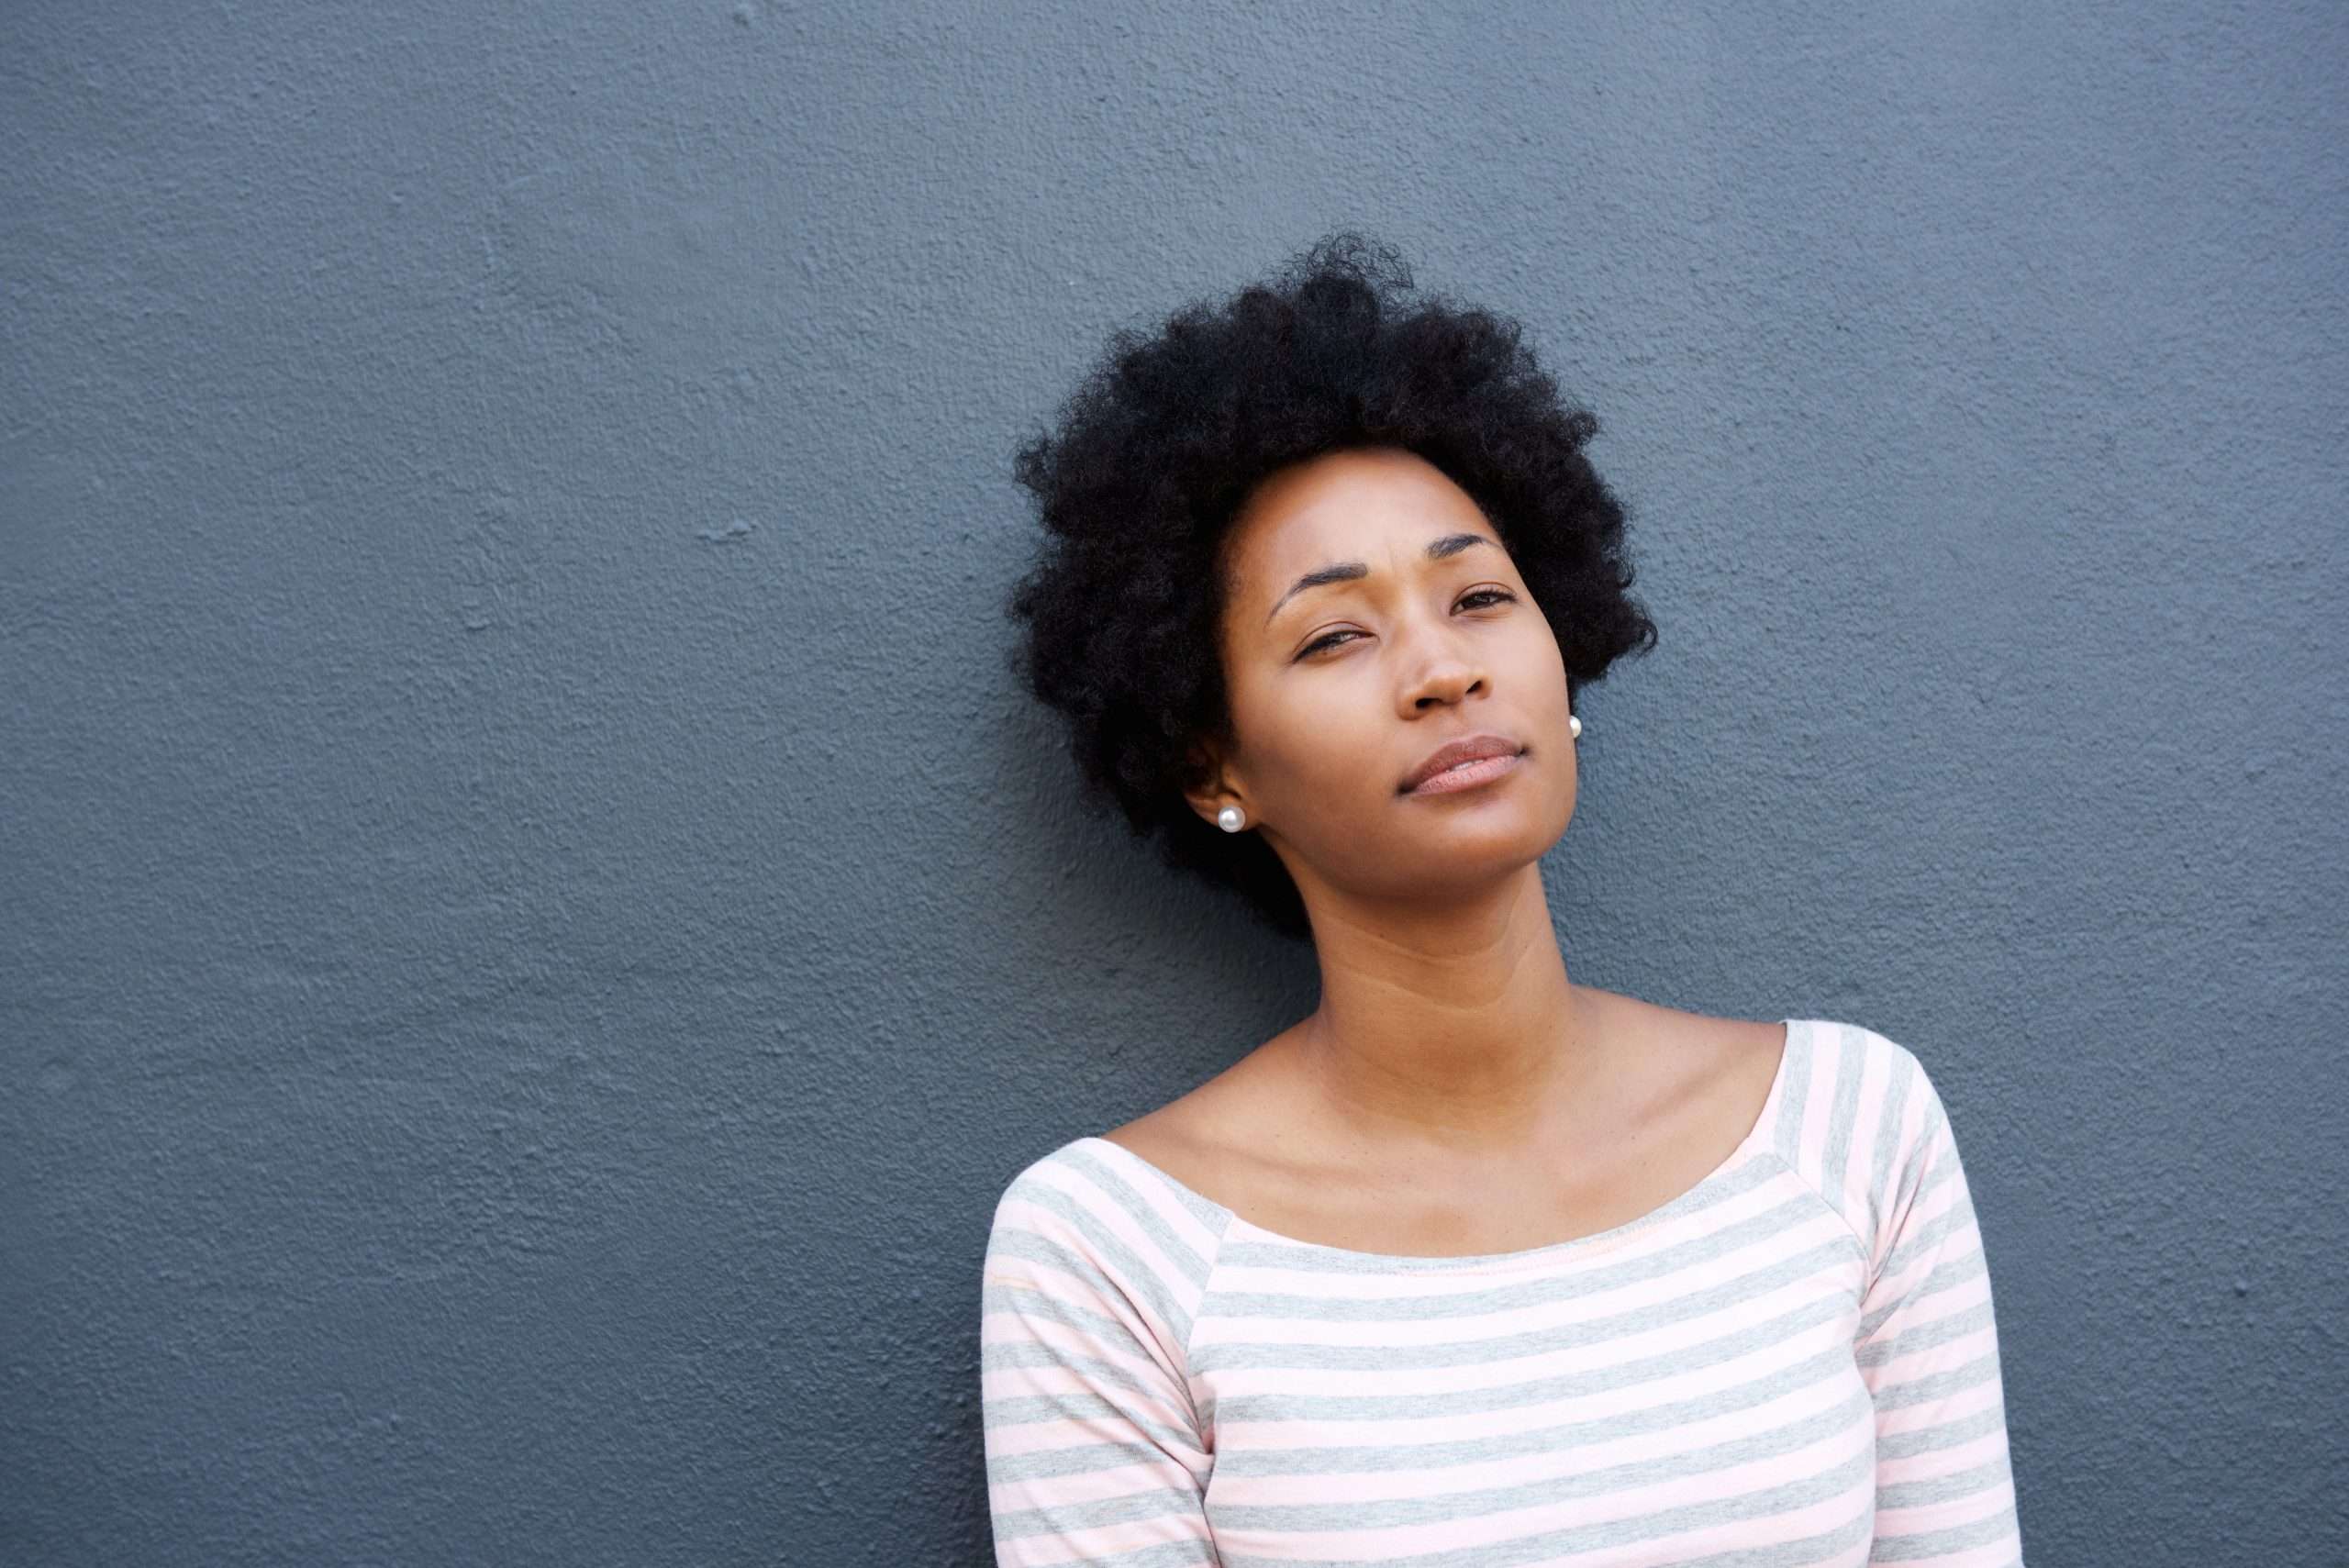 Black Women with natural hair with mental standing against a wall